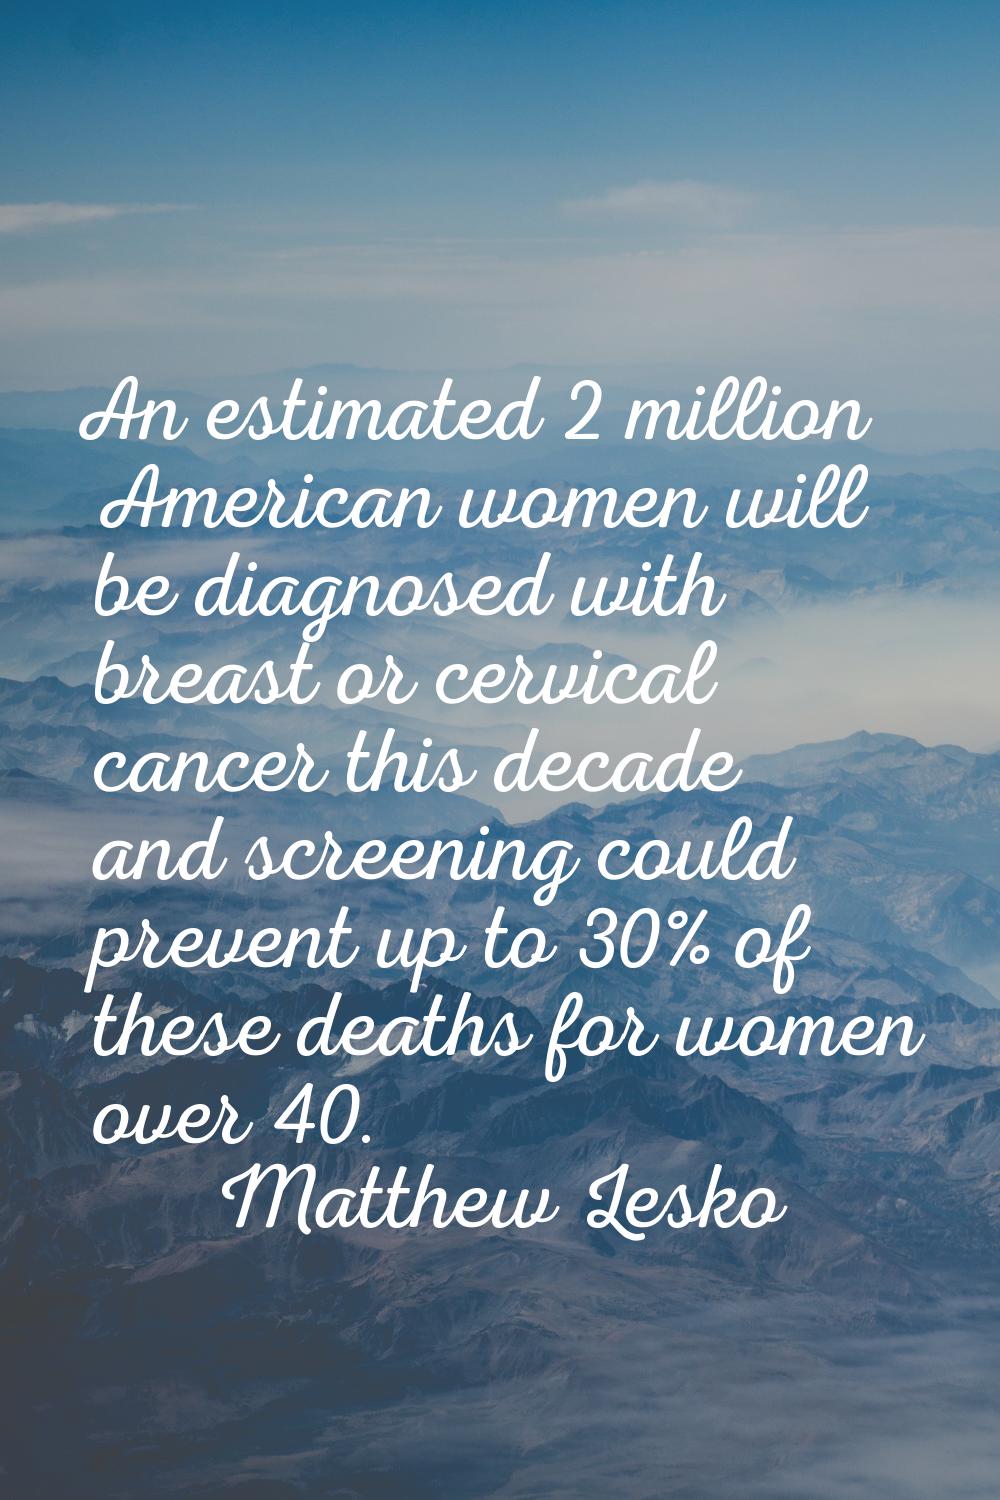 An estimated 2 million American women will be diagnosed with breast or cervical cancer this decade 